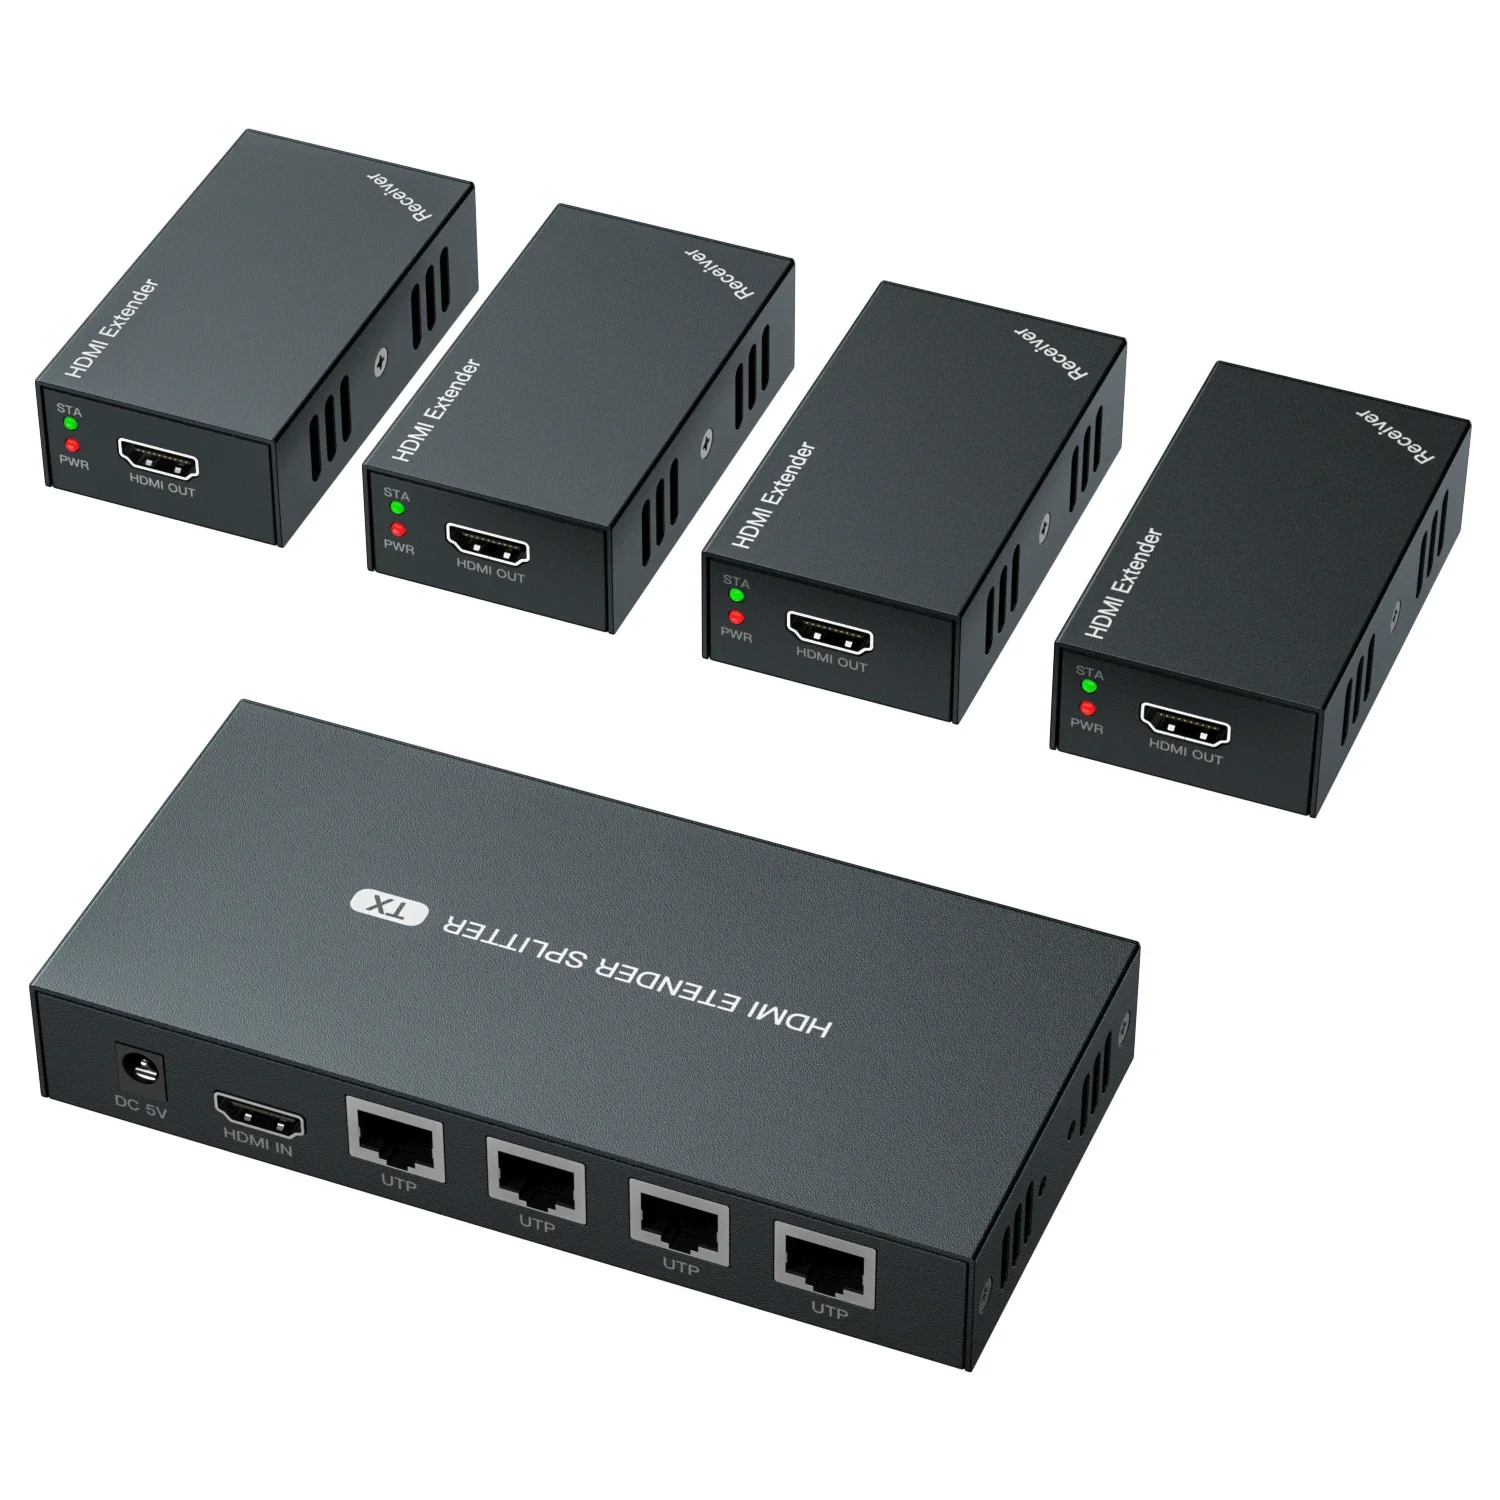 

1x4 HDMI Extender Splitter 1080p Over Cat5e/Cat6 Ethernet Cable with Loopout - Up to 50m/165ft - EDID Management 1920*1080@60Hz